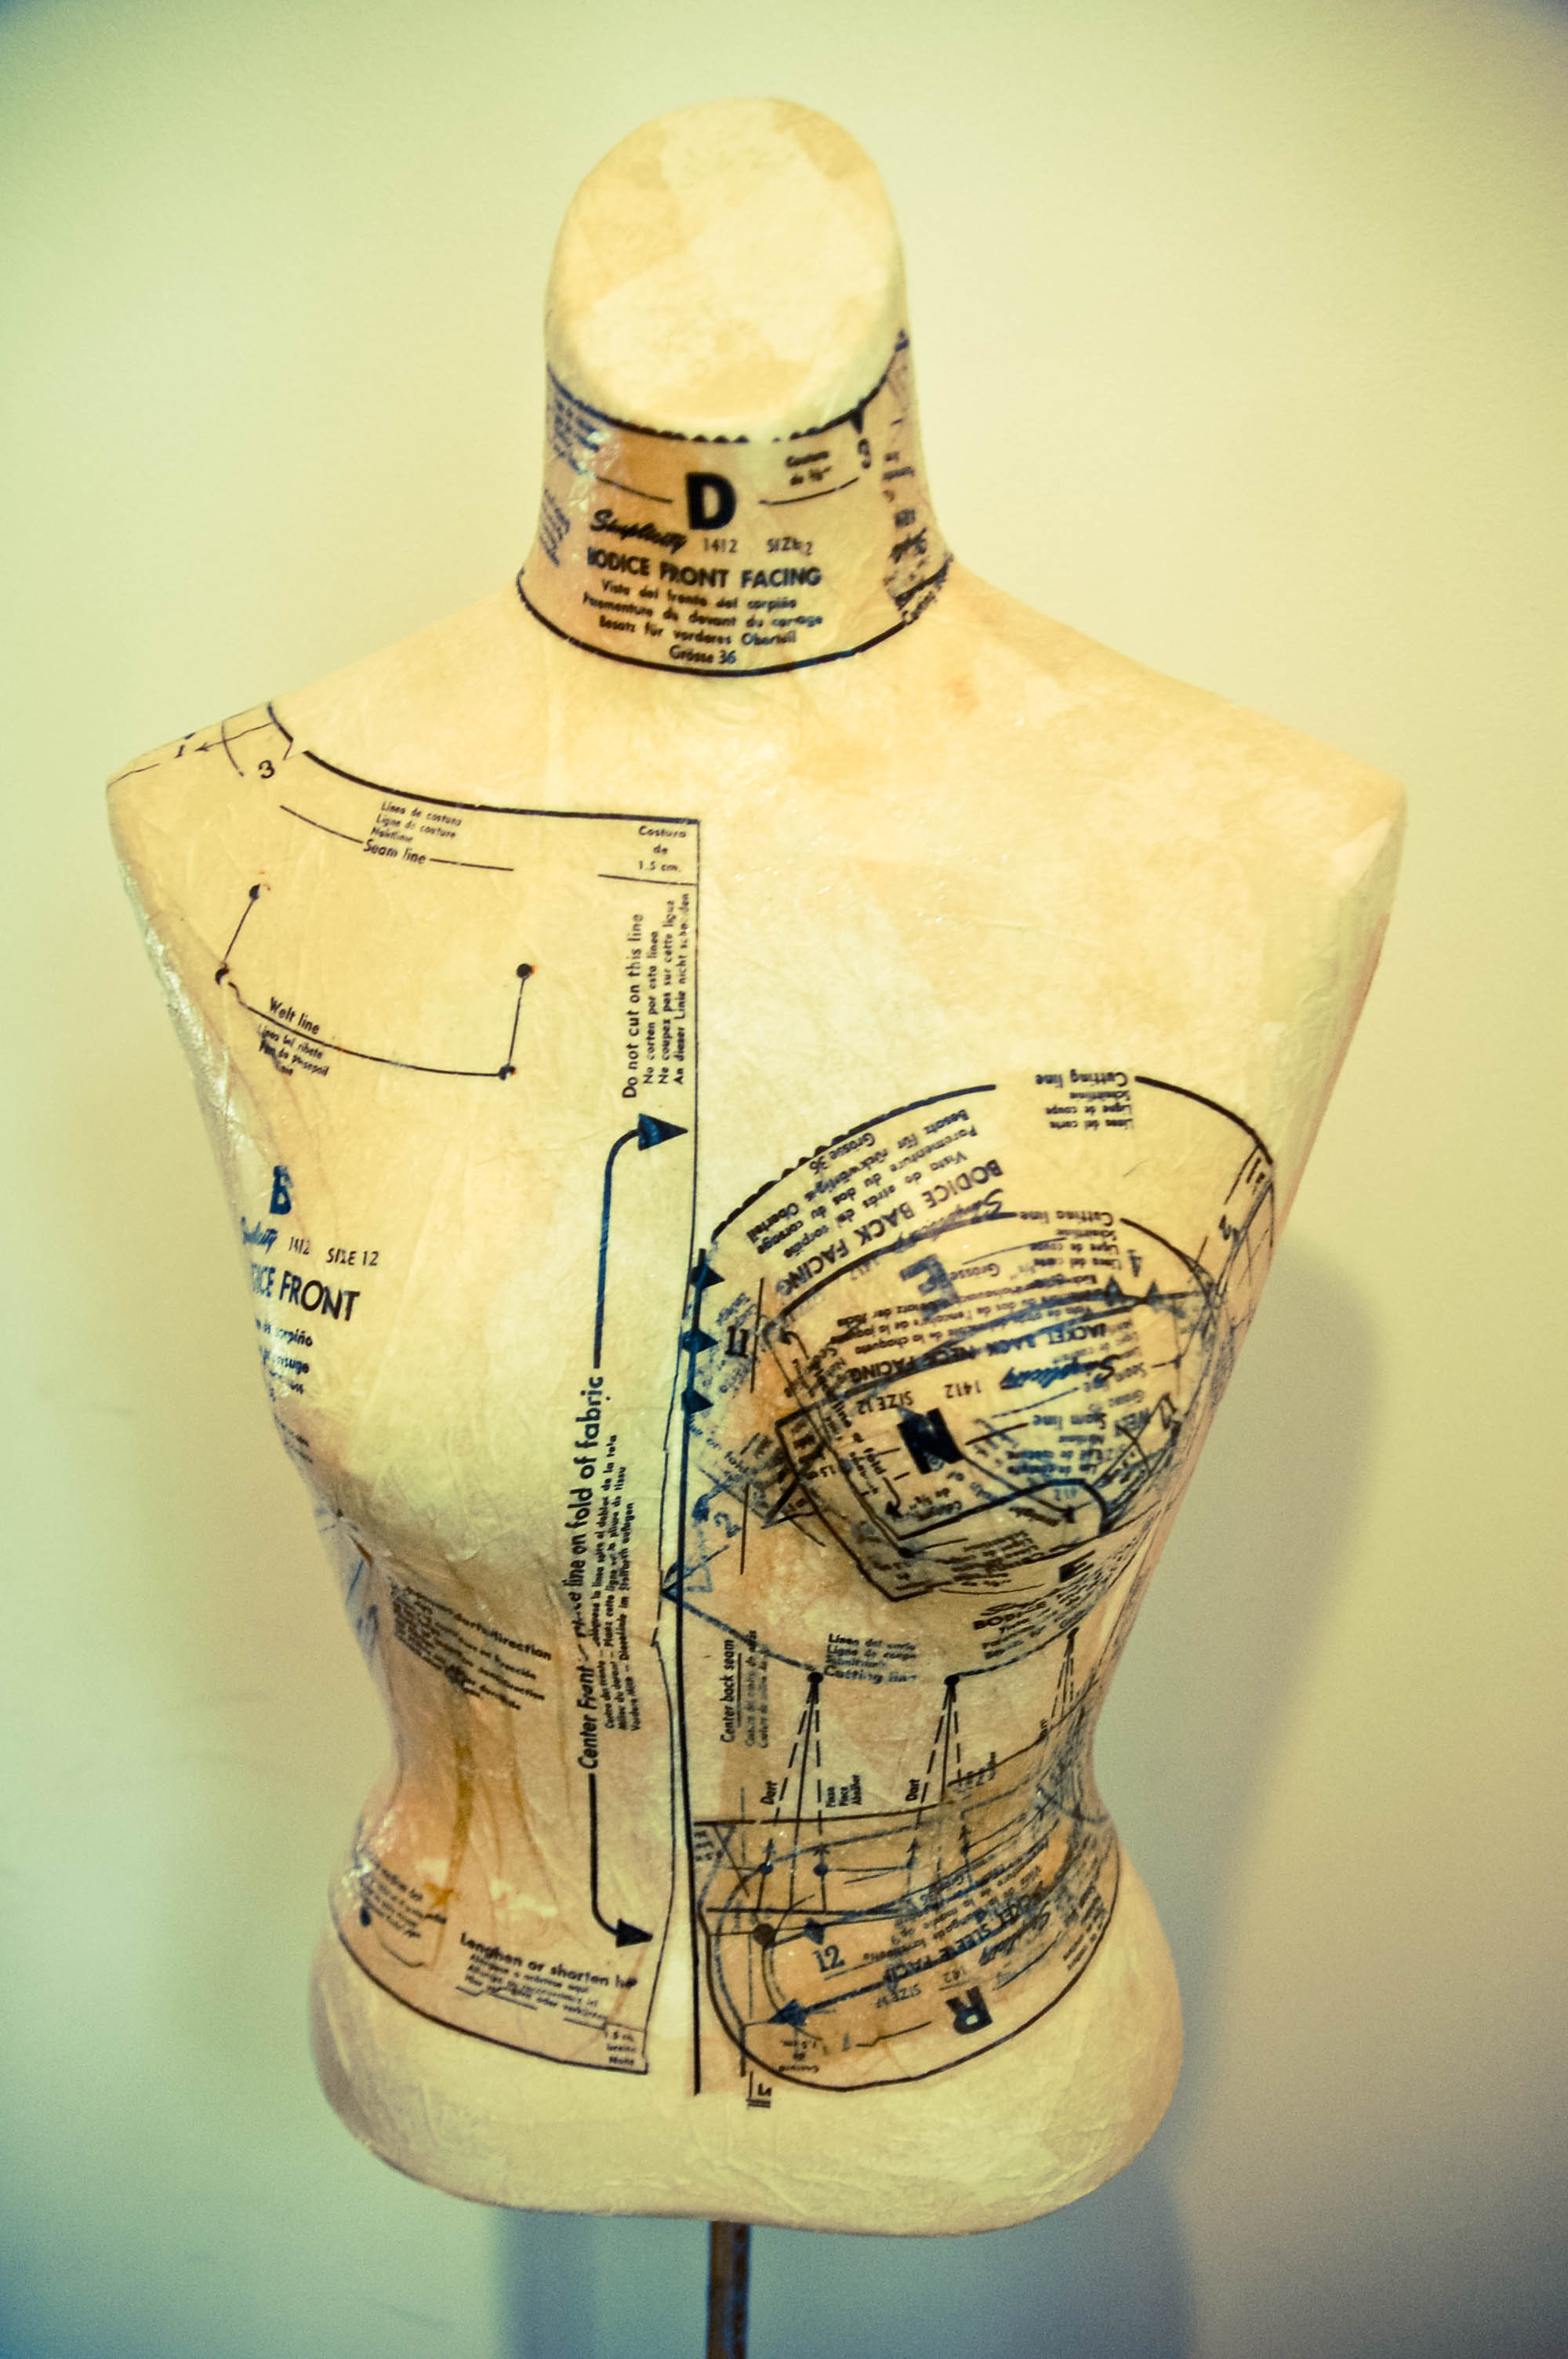 DIY Dress Form from Mannequin – Sewing Projects | BurdaStyle.com